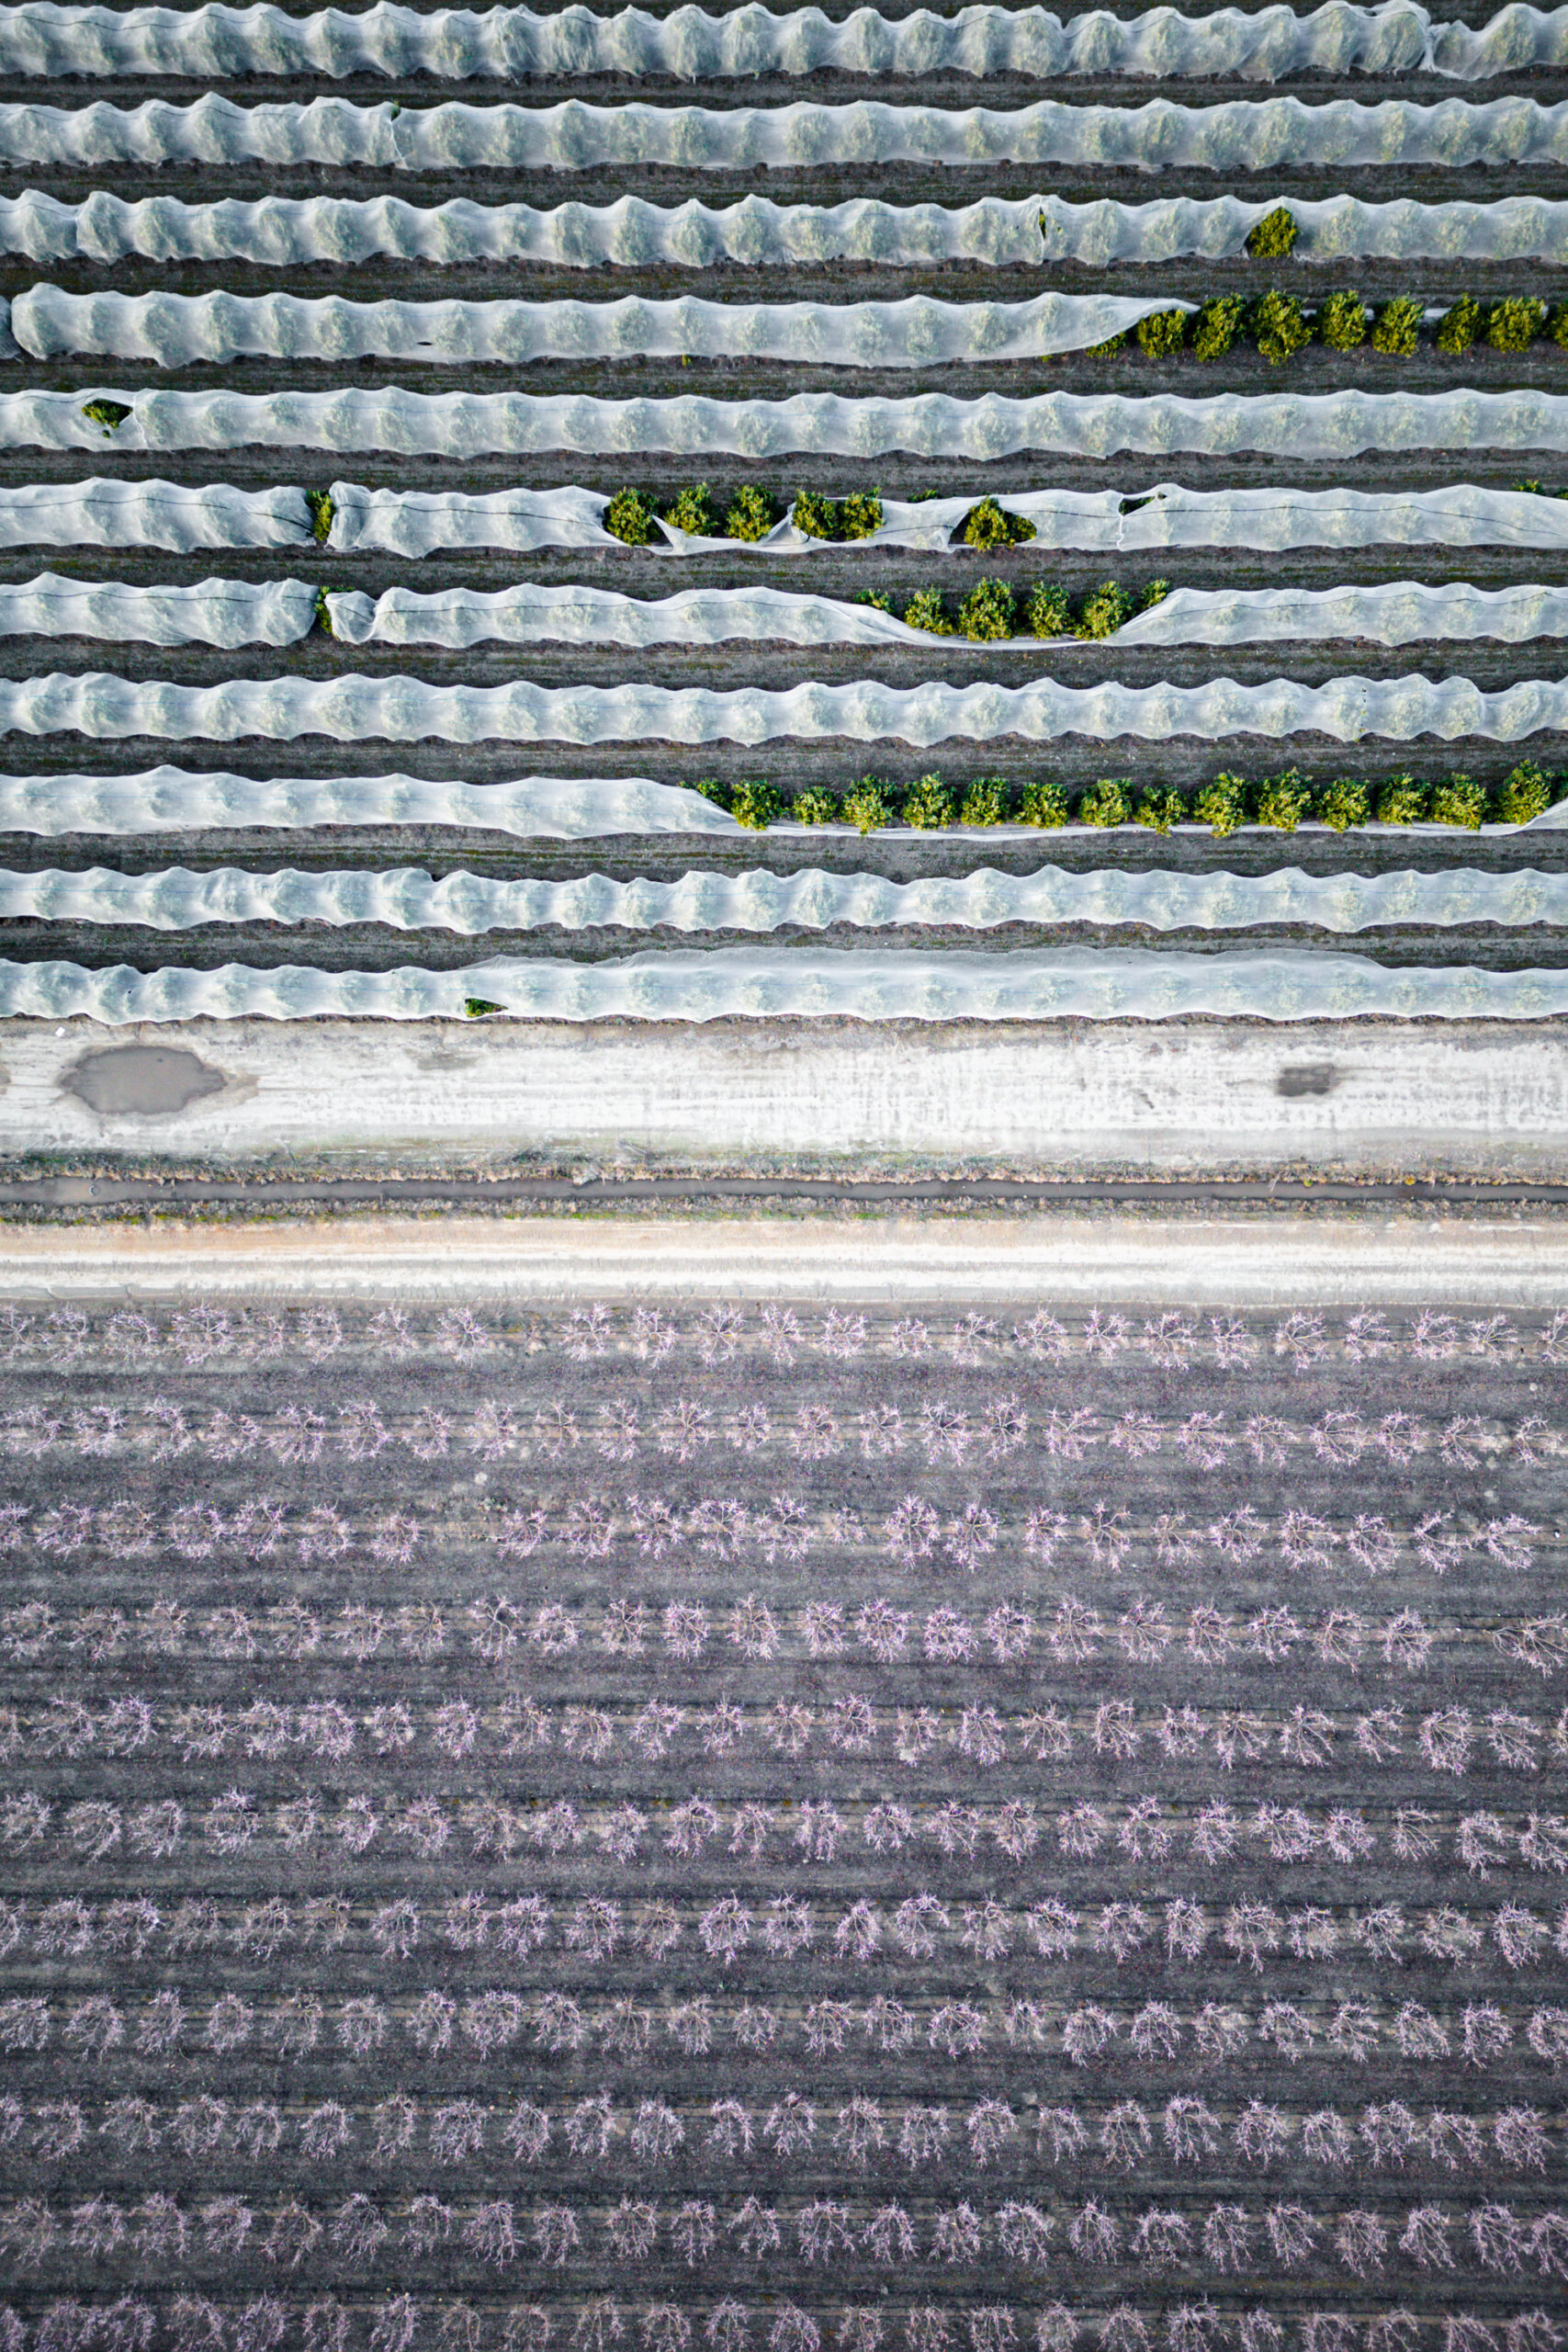 Aerial view of dozens of netted citrus trees next to a stone fruit orchard